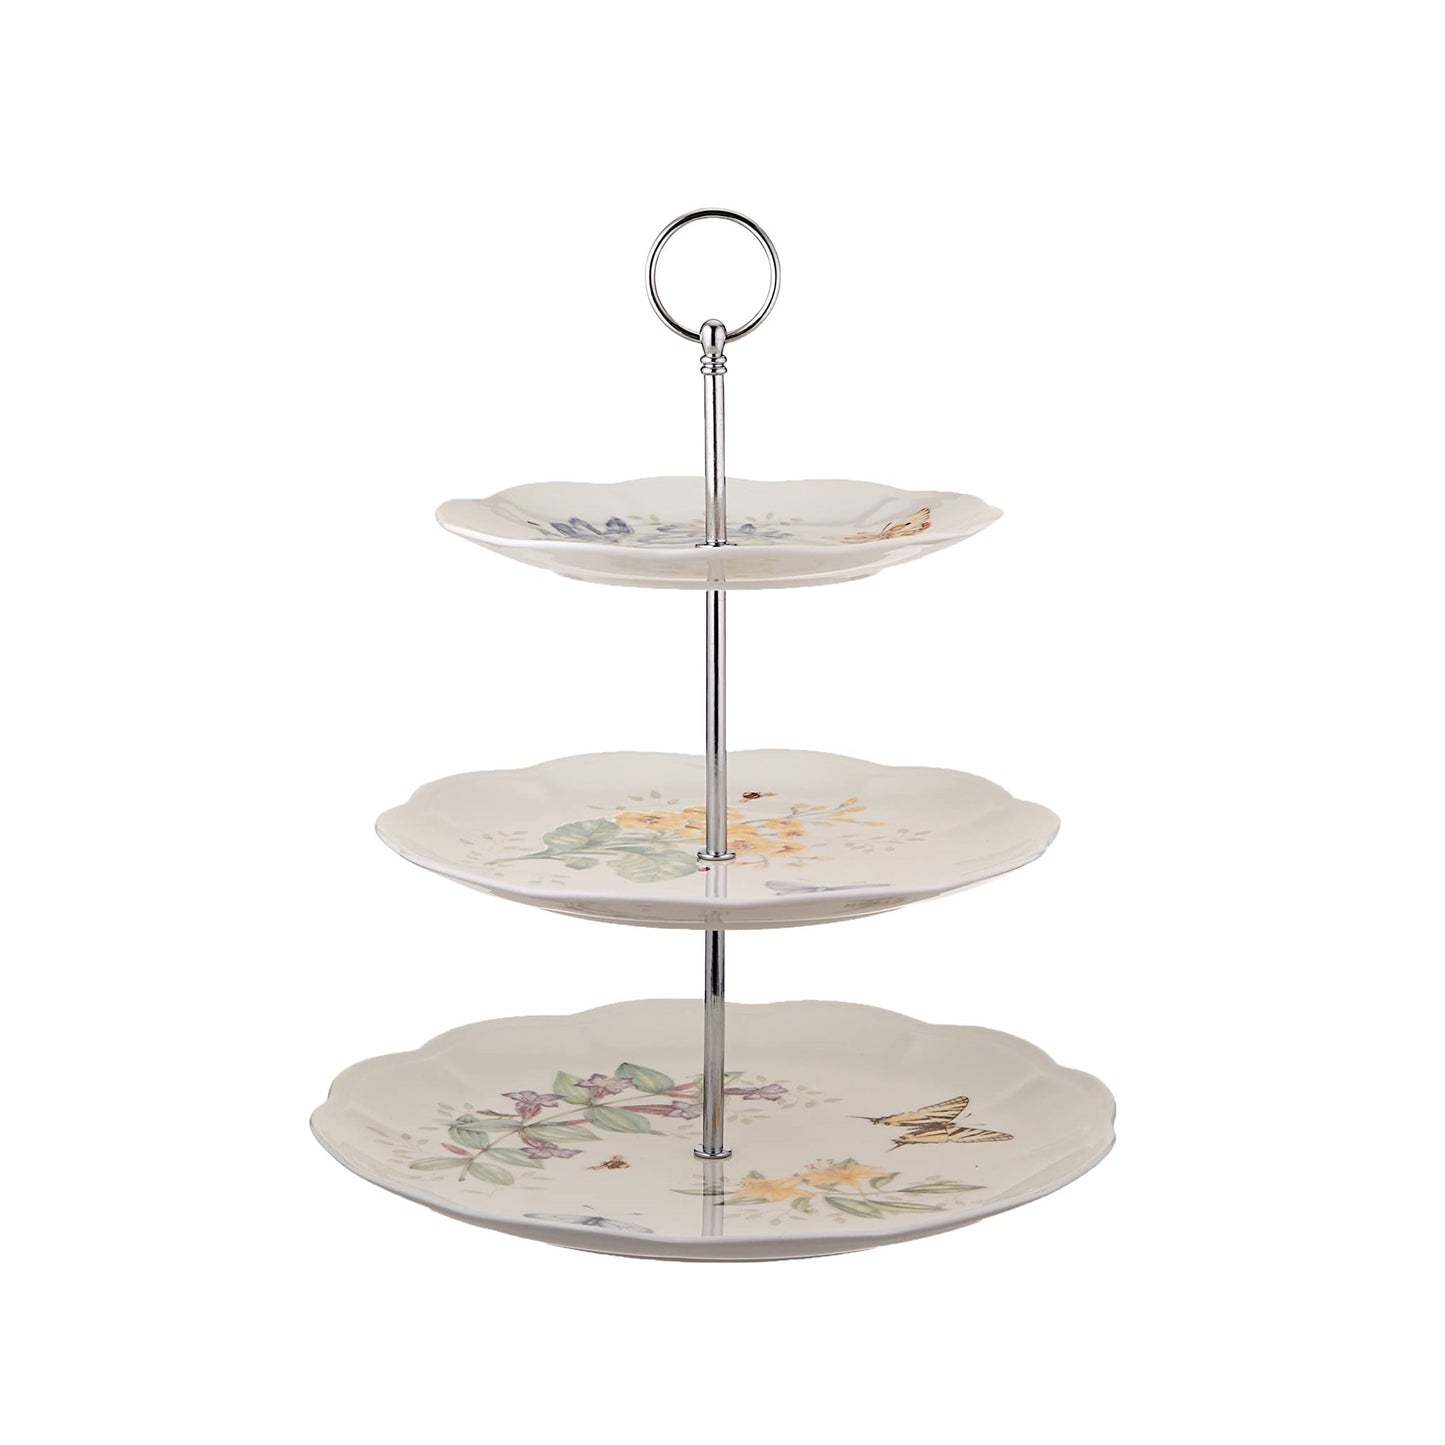 Butterfly Meadow® 3-Tiered Server by Lenox